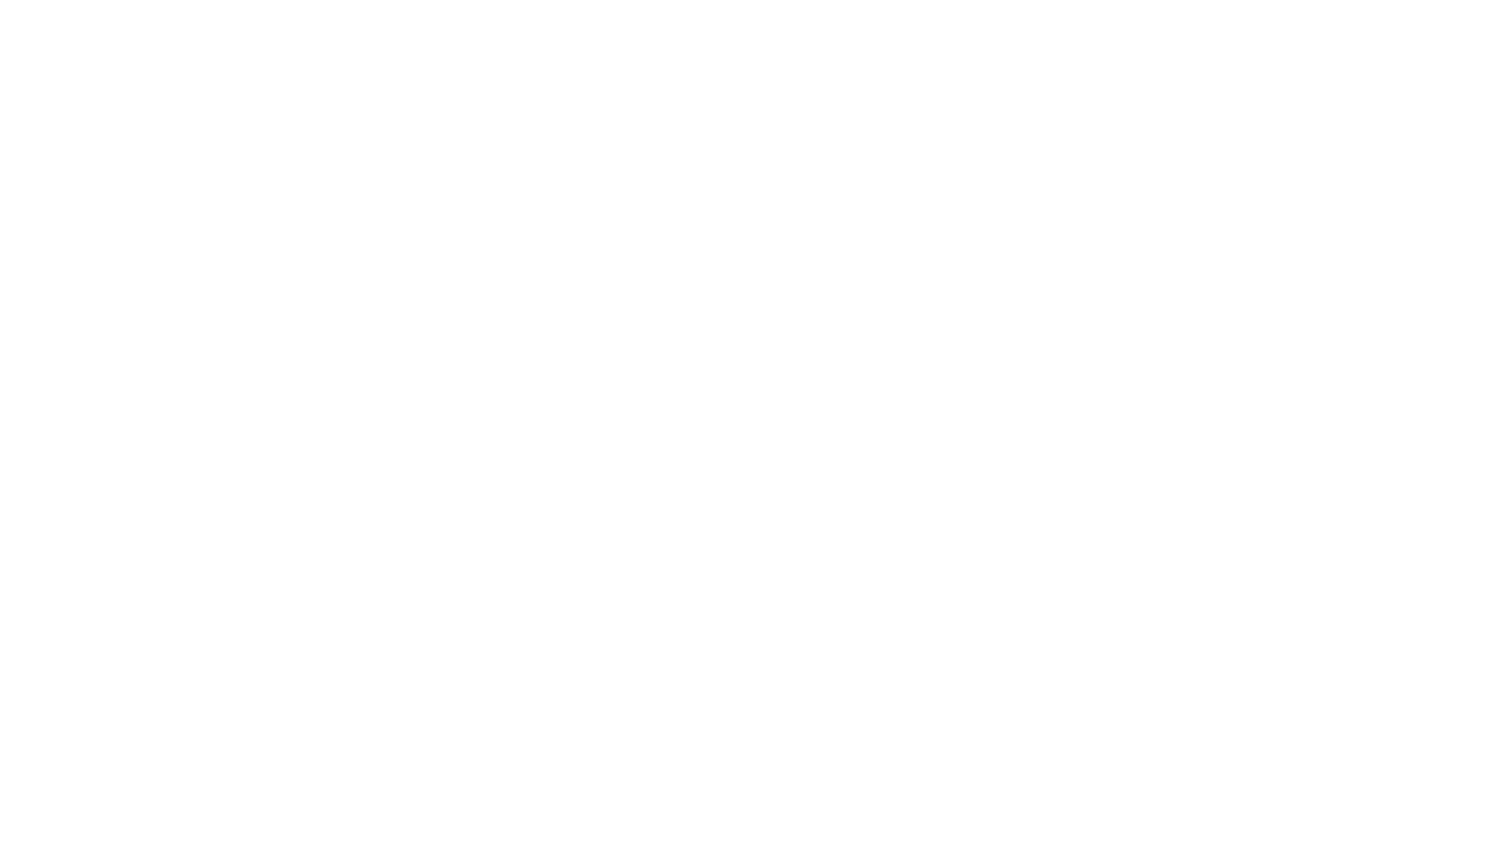 The HELM